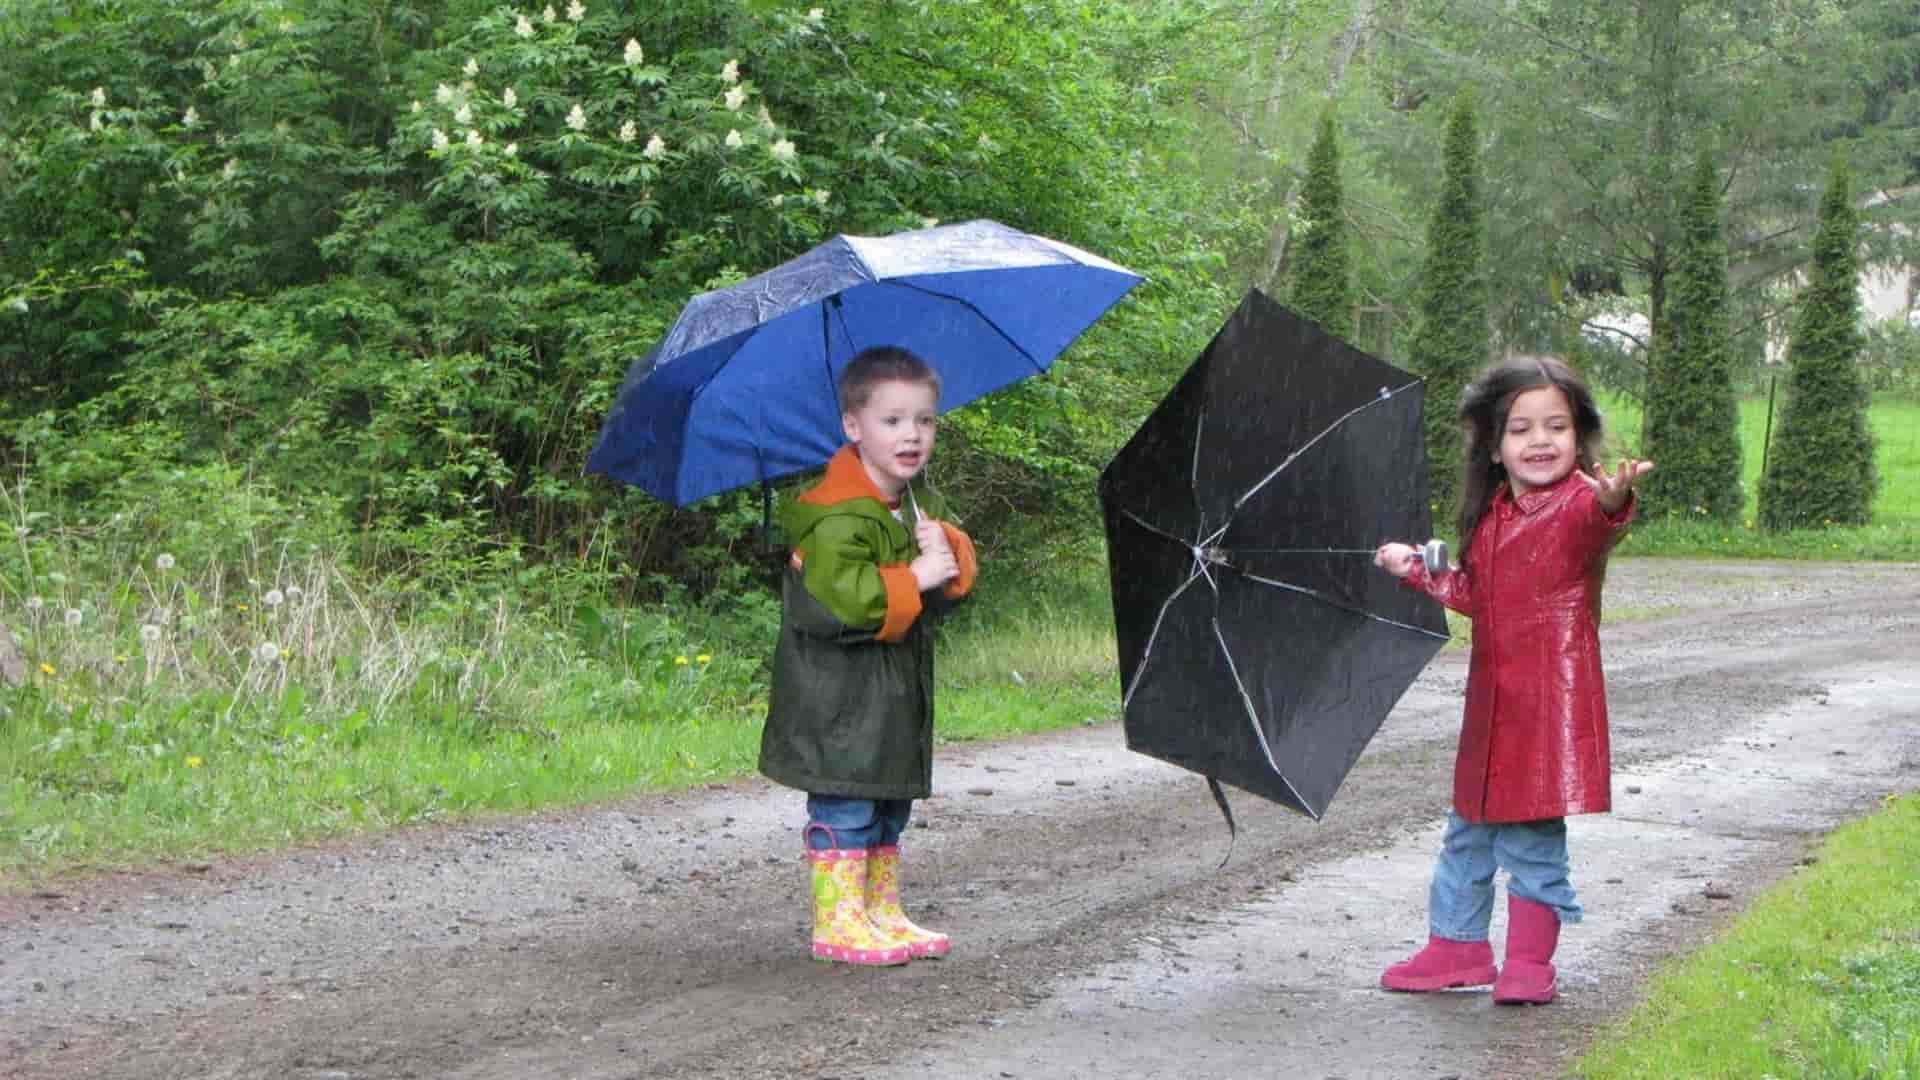 Children Going for a walk and exploring nature